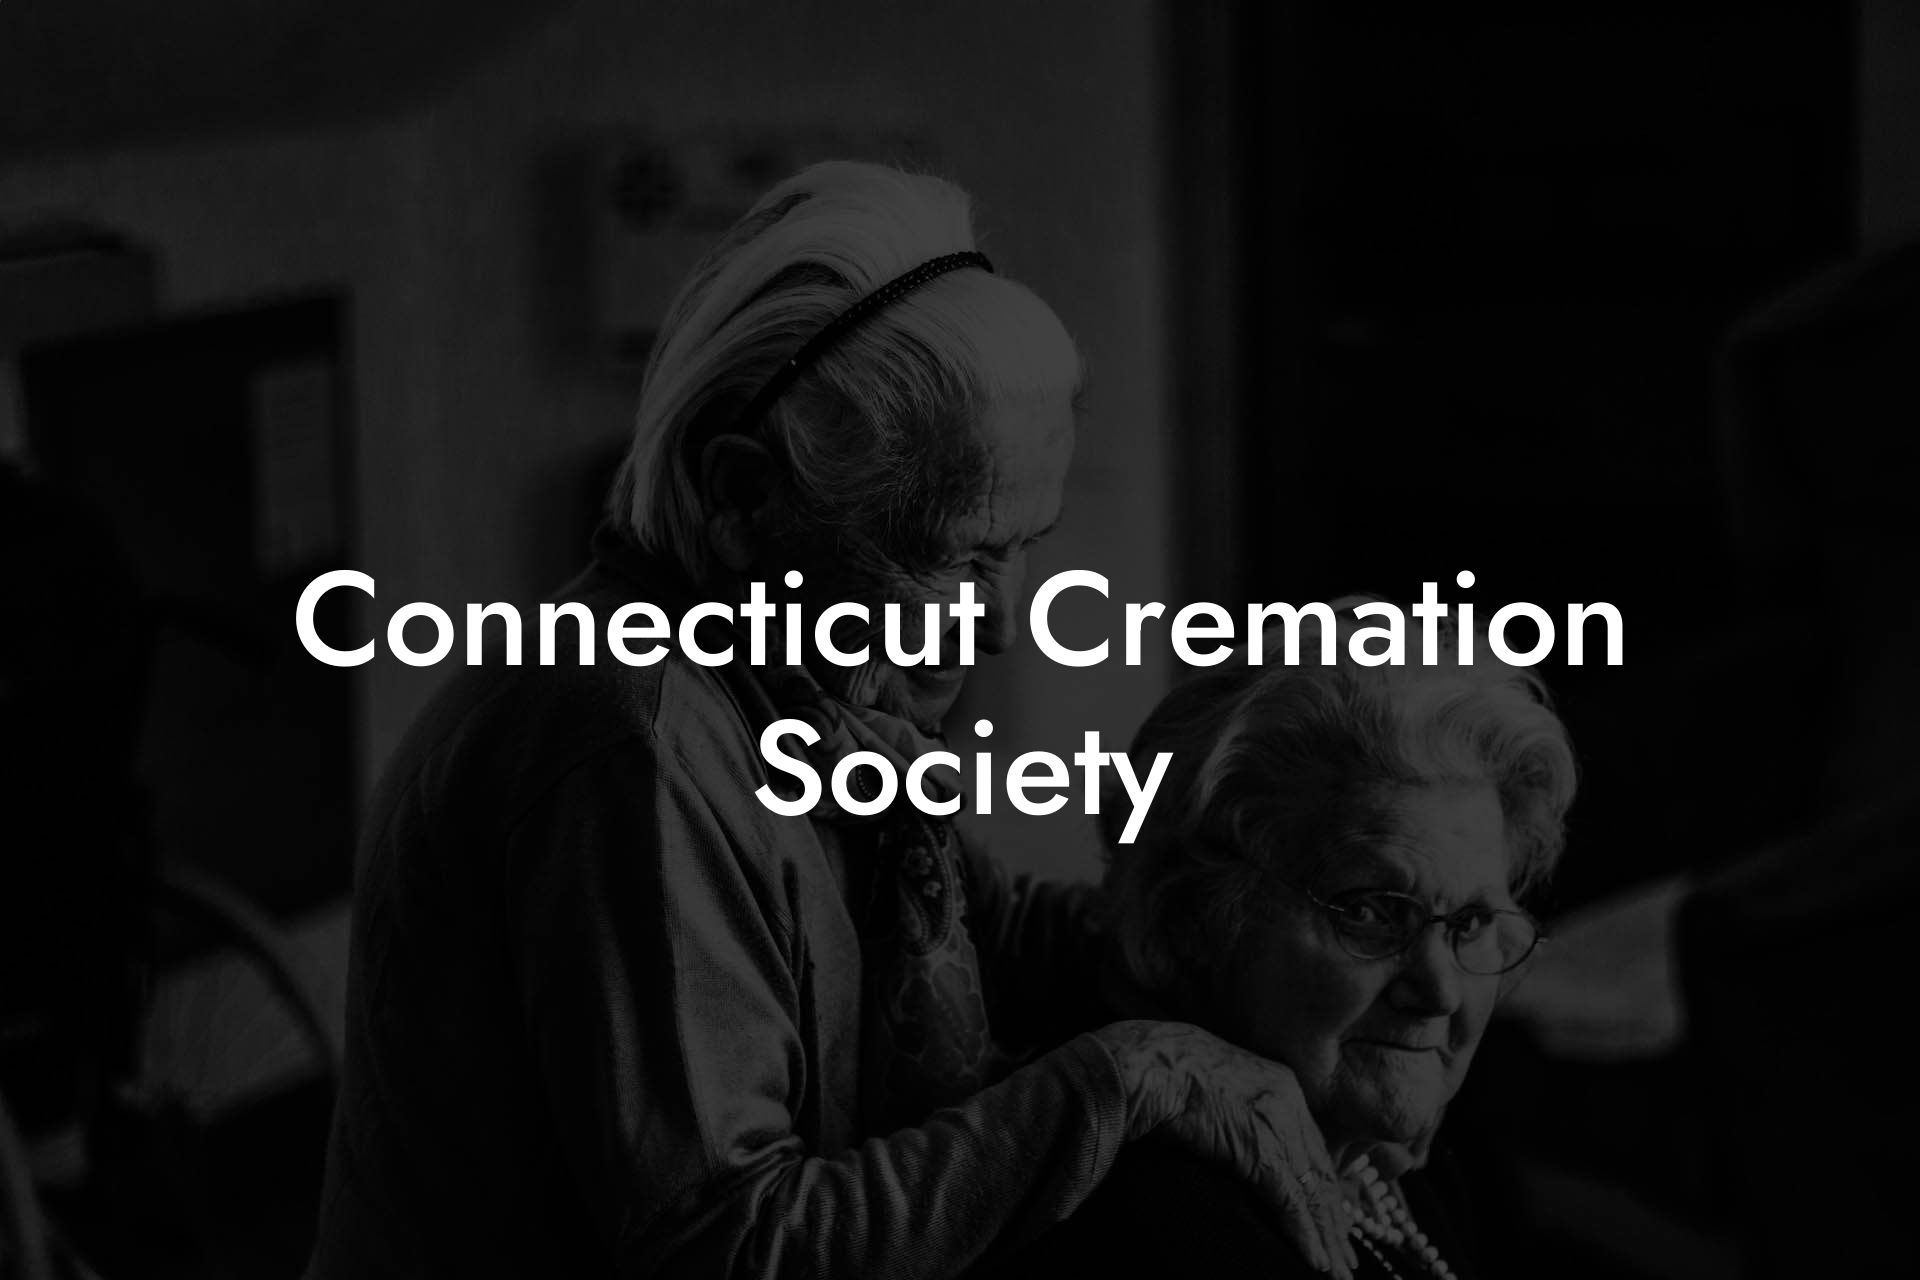 Connecticut Cremation Society